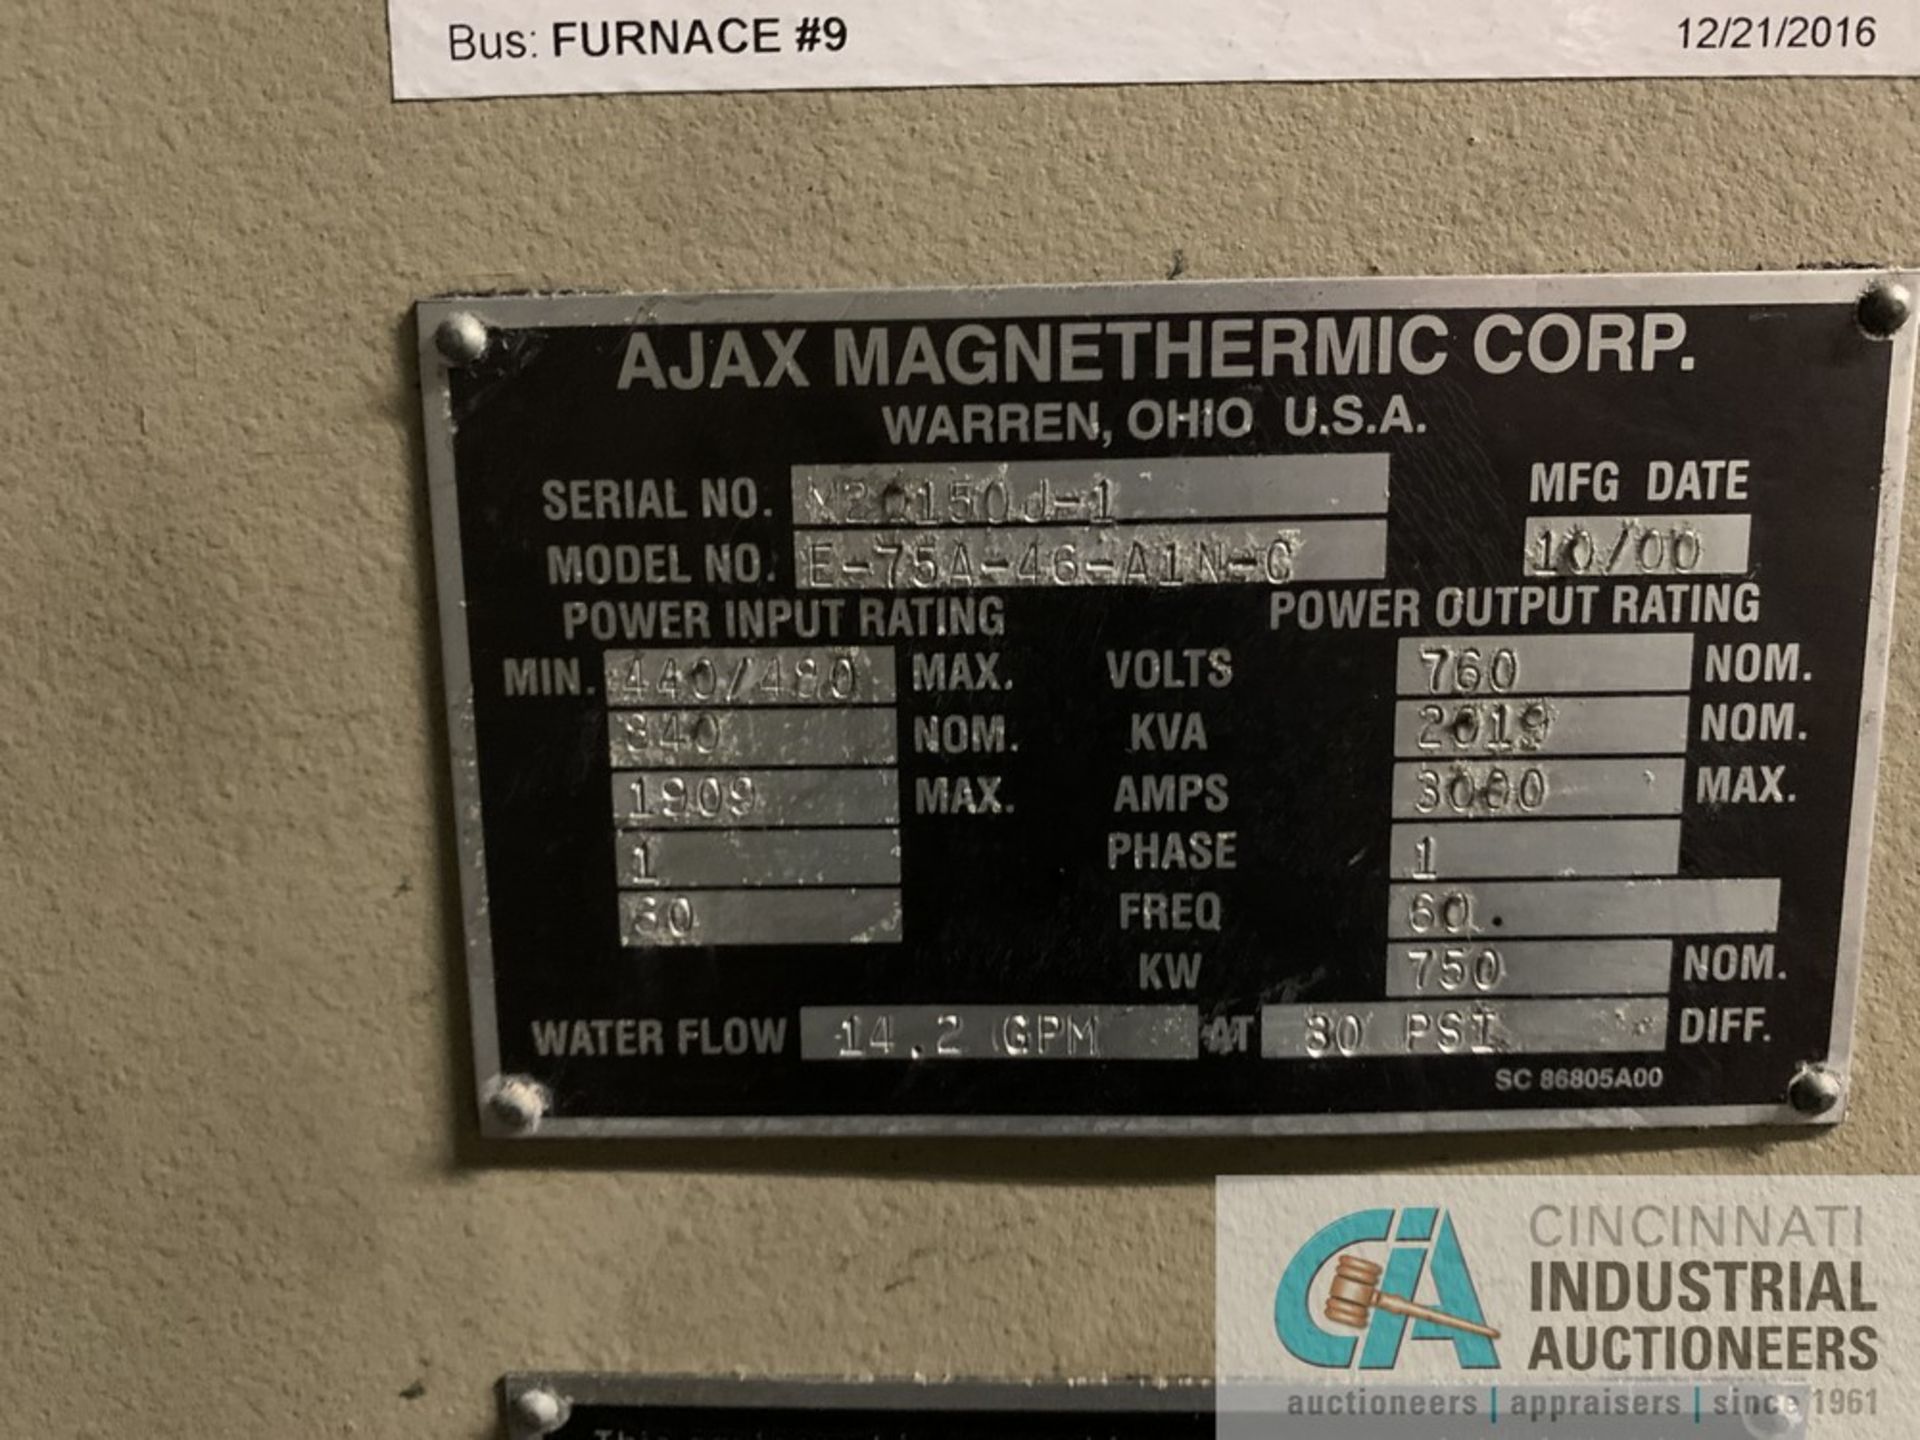 OVERALL LOTS 3 AND 3A 20,000 LB. AJAX MAGNATHERMIC CHANNEL TYPE INDUCTION MELTING FURNACE W/ POWER - Image 3 of 5